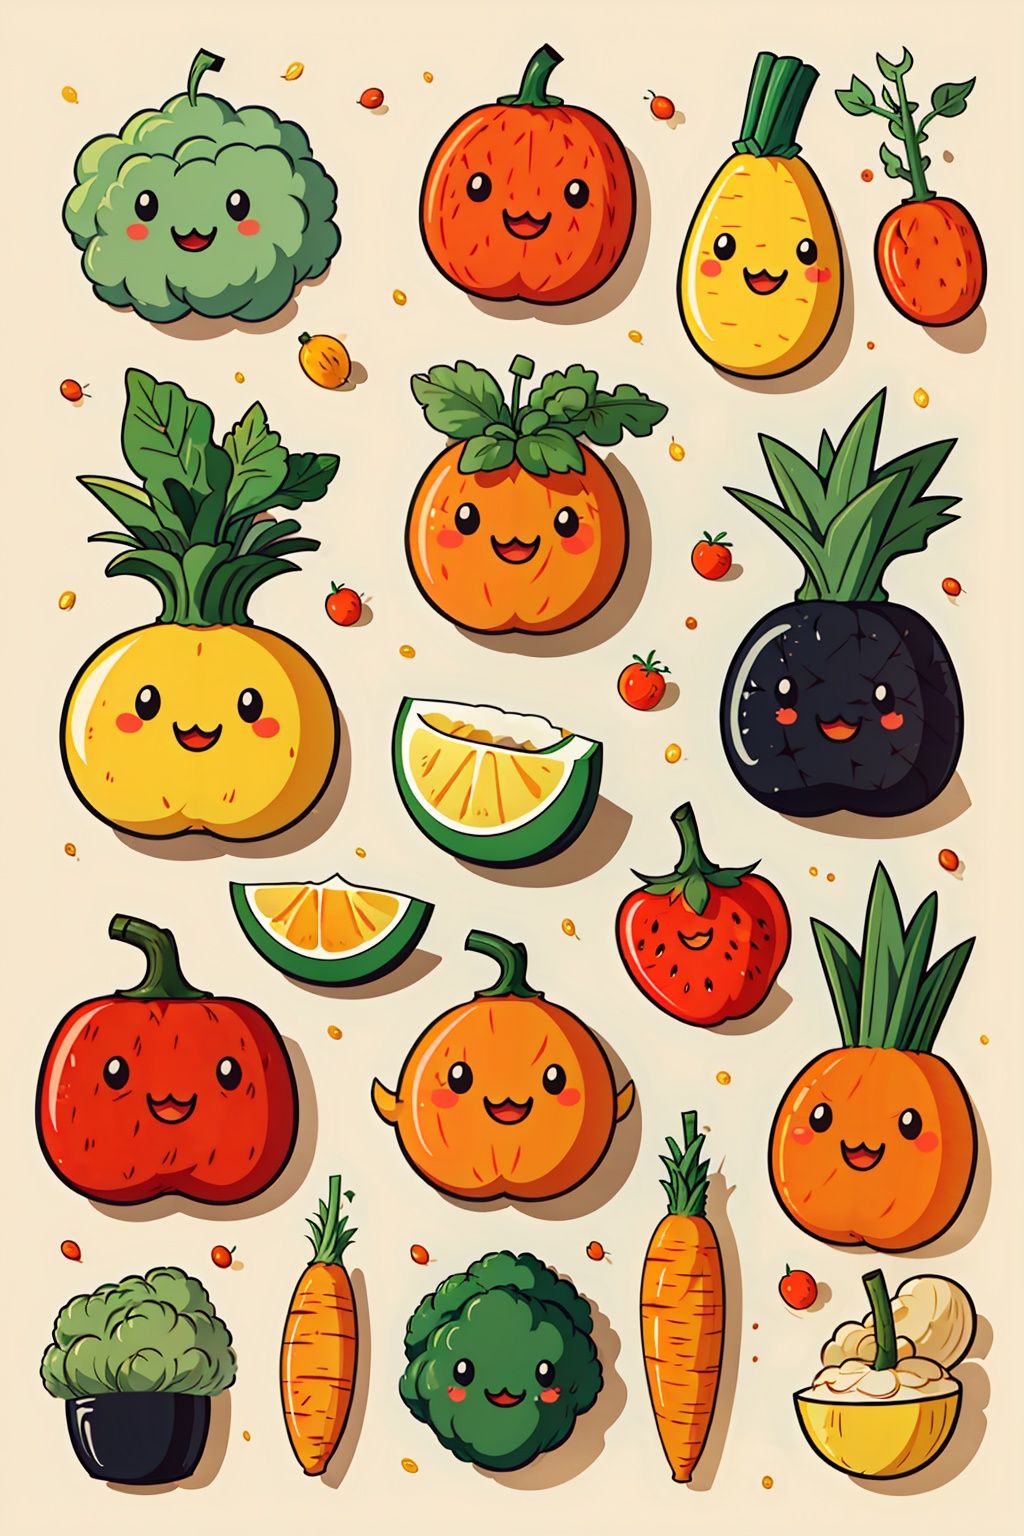 leaf,plant,potted_plant,palm_tree,tanabata,bamboo,orange_\(fruit\),tanzaku,fruit,chick,gradient,gradient_background,bird,tulip,kagami_mochi,orange_background,tomato,food,vegetable,fruit_on_head,palm_leaf,carrot,spring_onion,no_humans,pumpkin,flower_pot,branch,yellow_background,holding_vegetable,onion